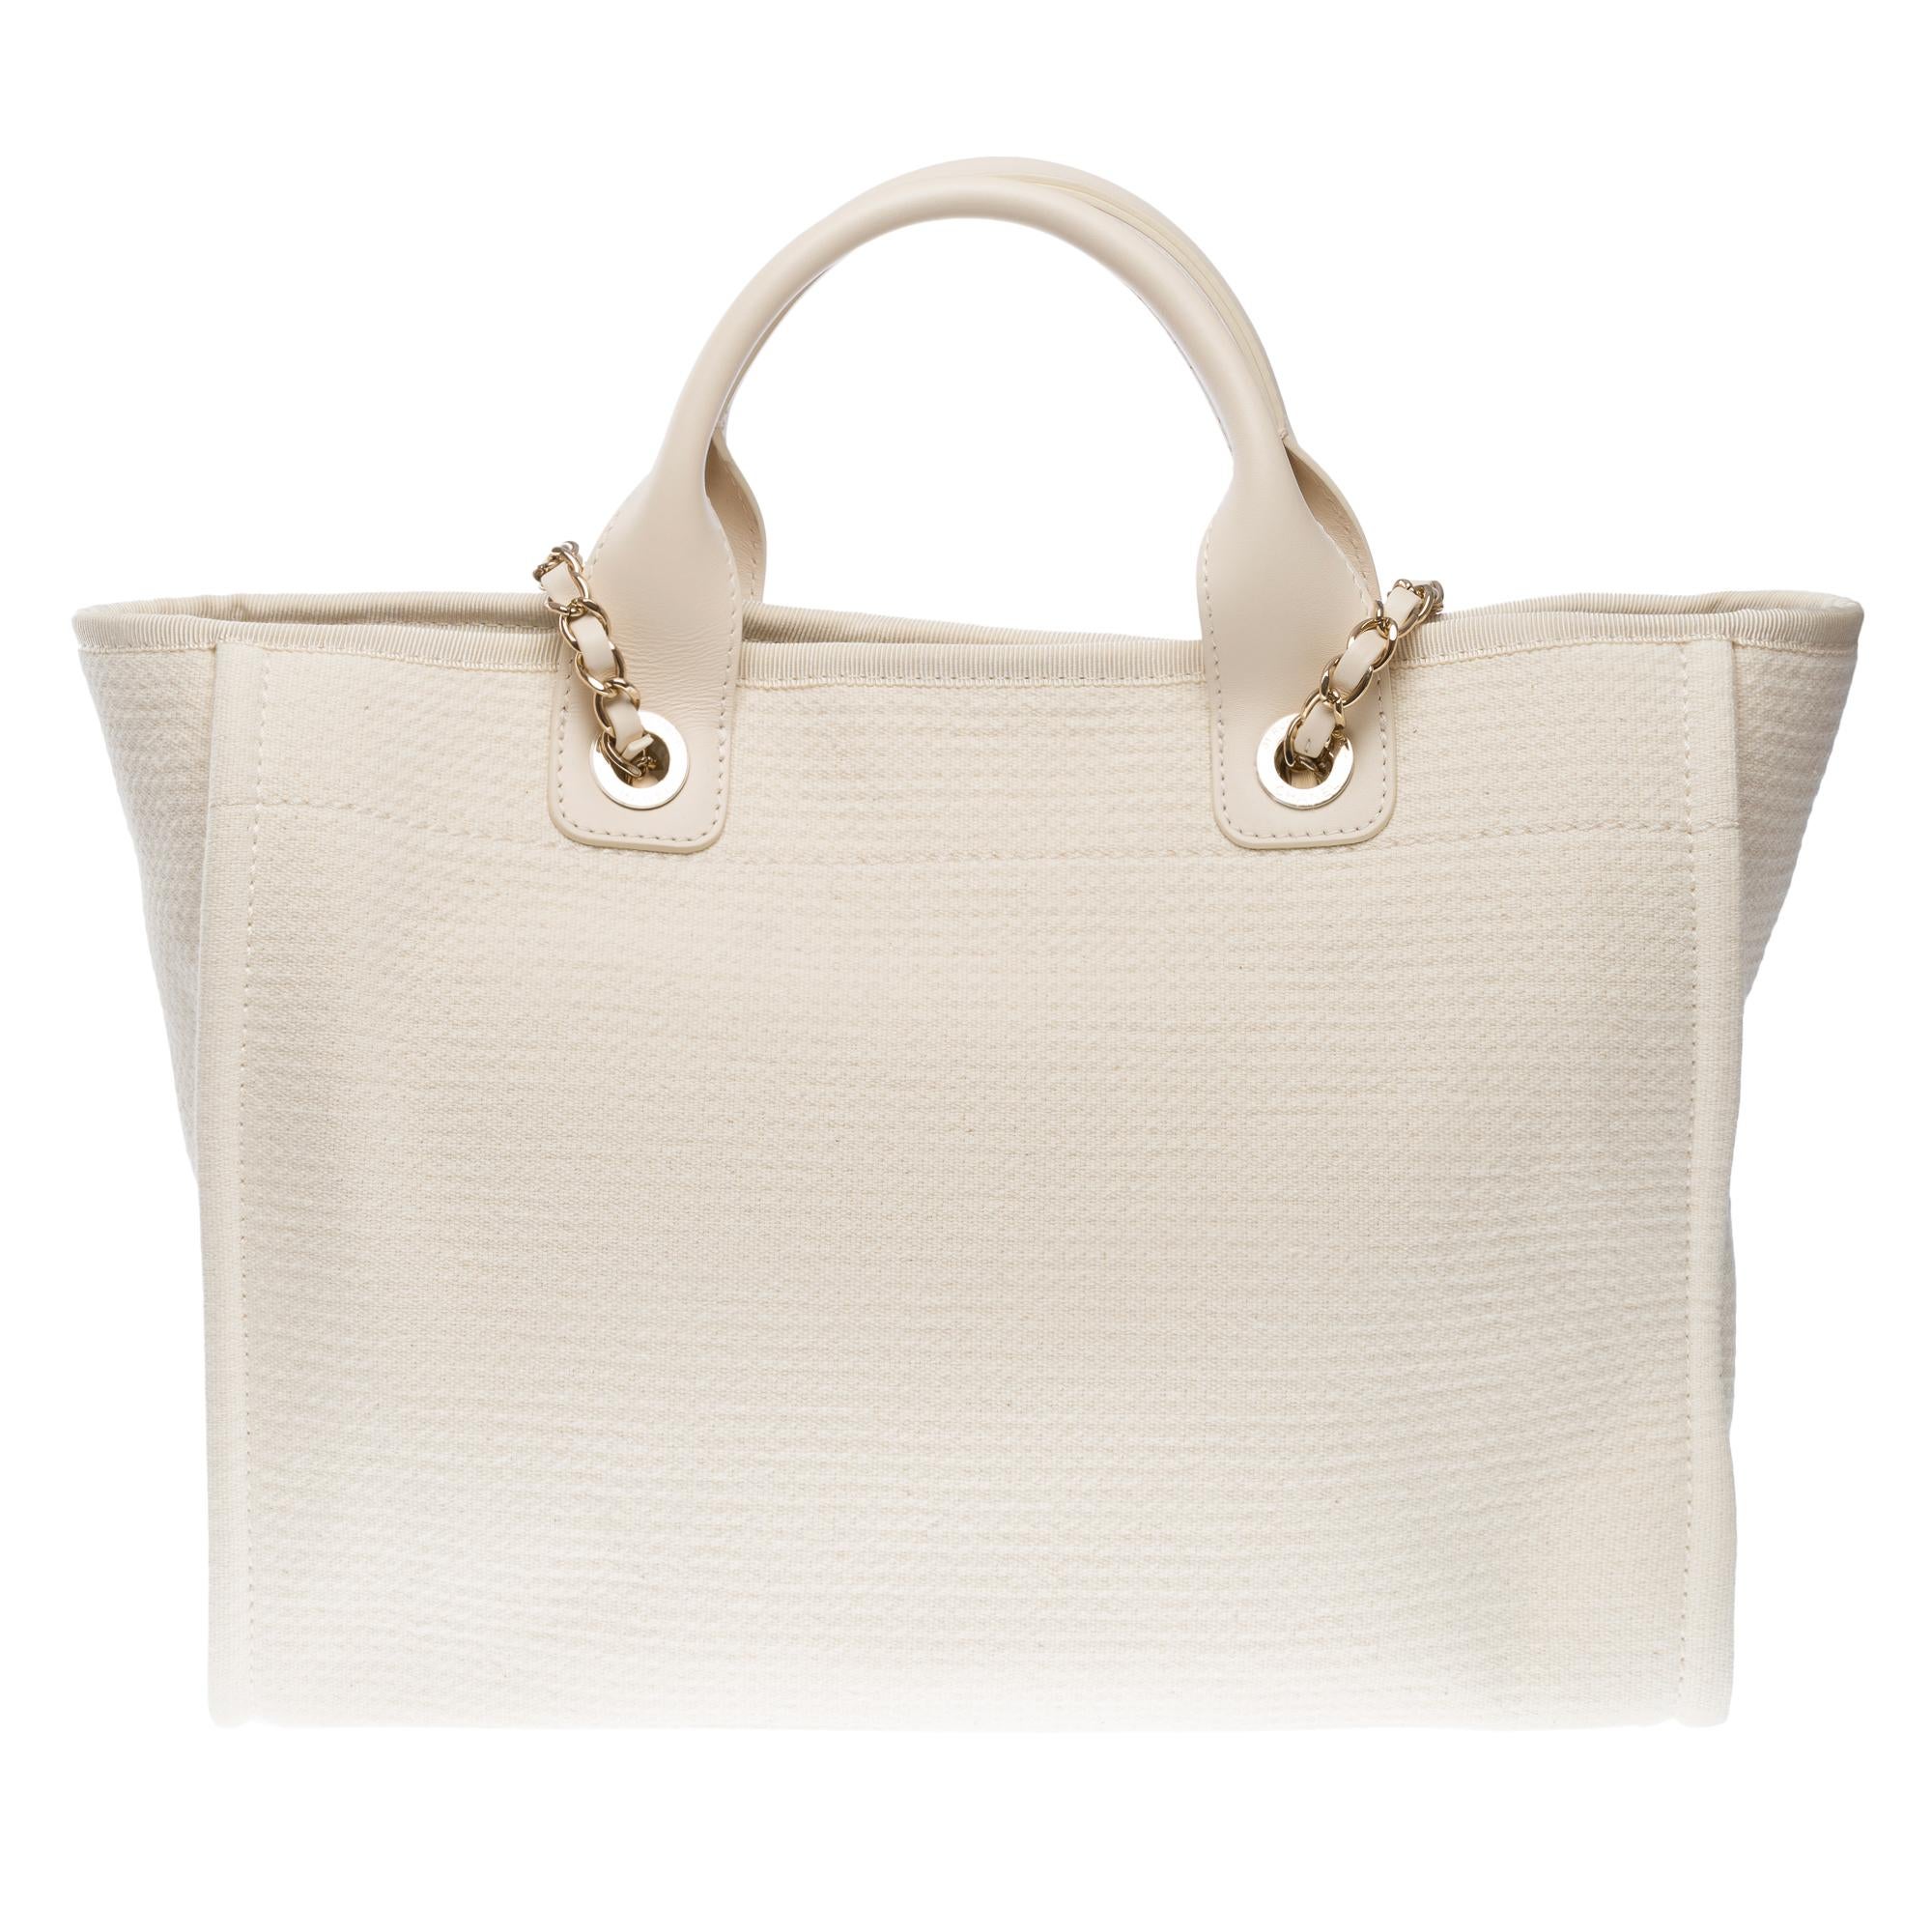 Amazing Chanel Deauville tote bag in off white canvas, SHW For Sale 1